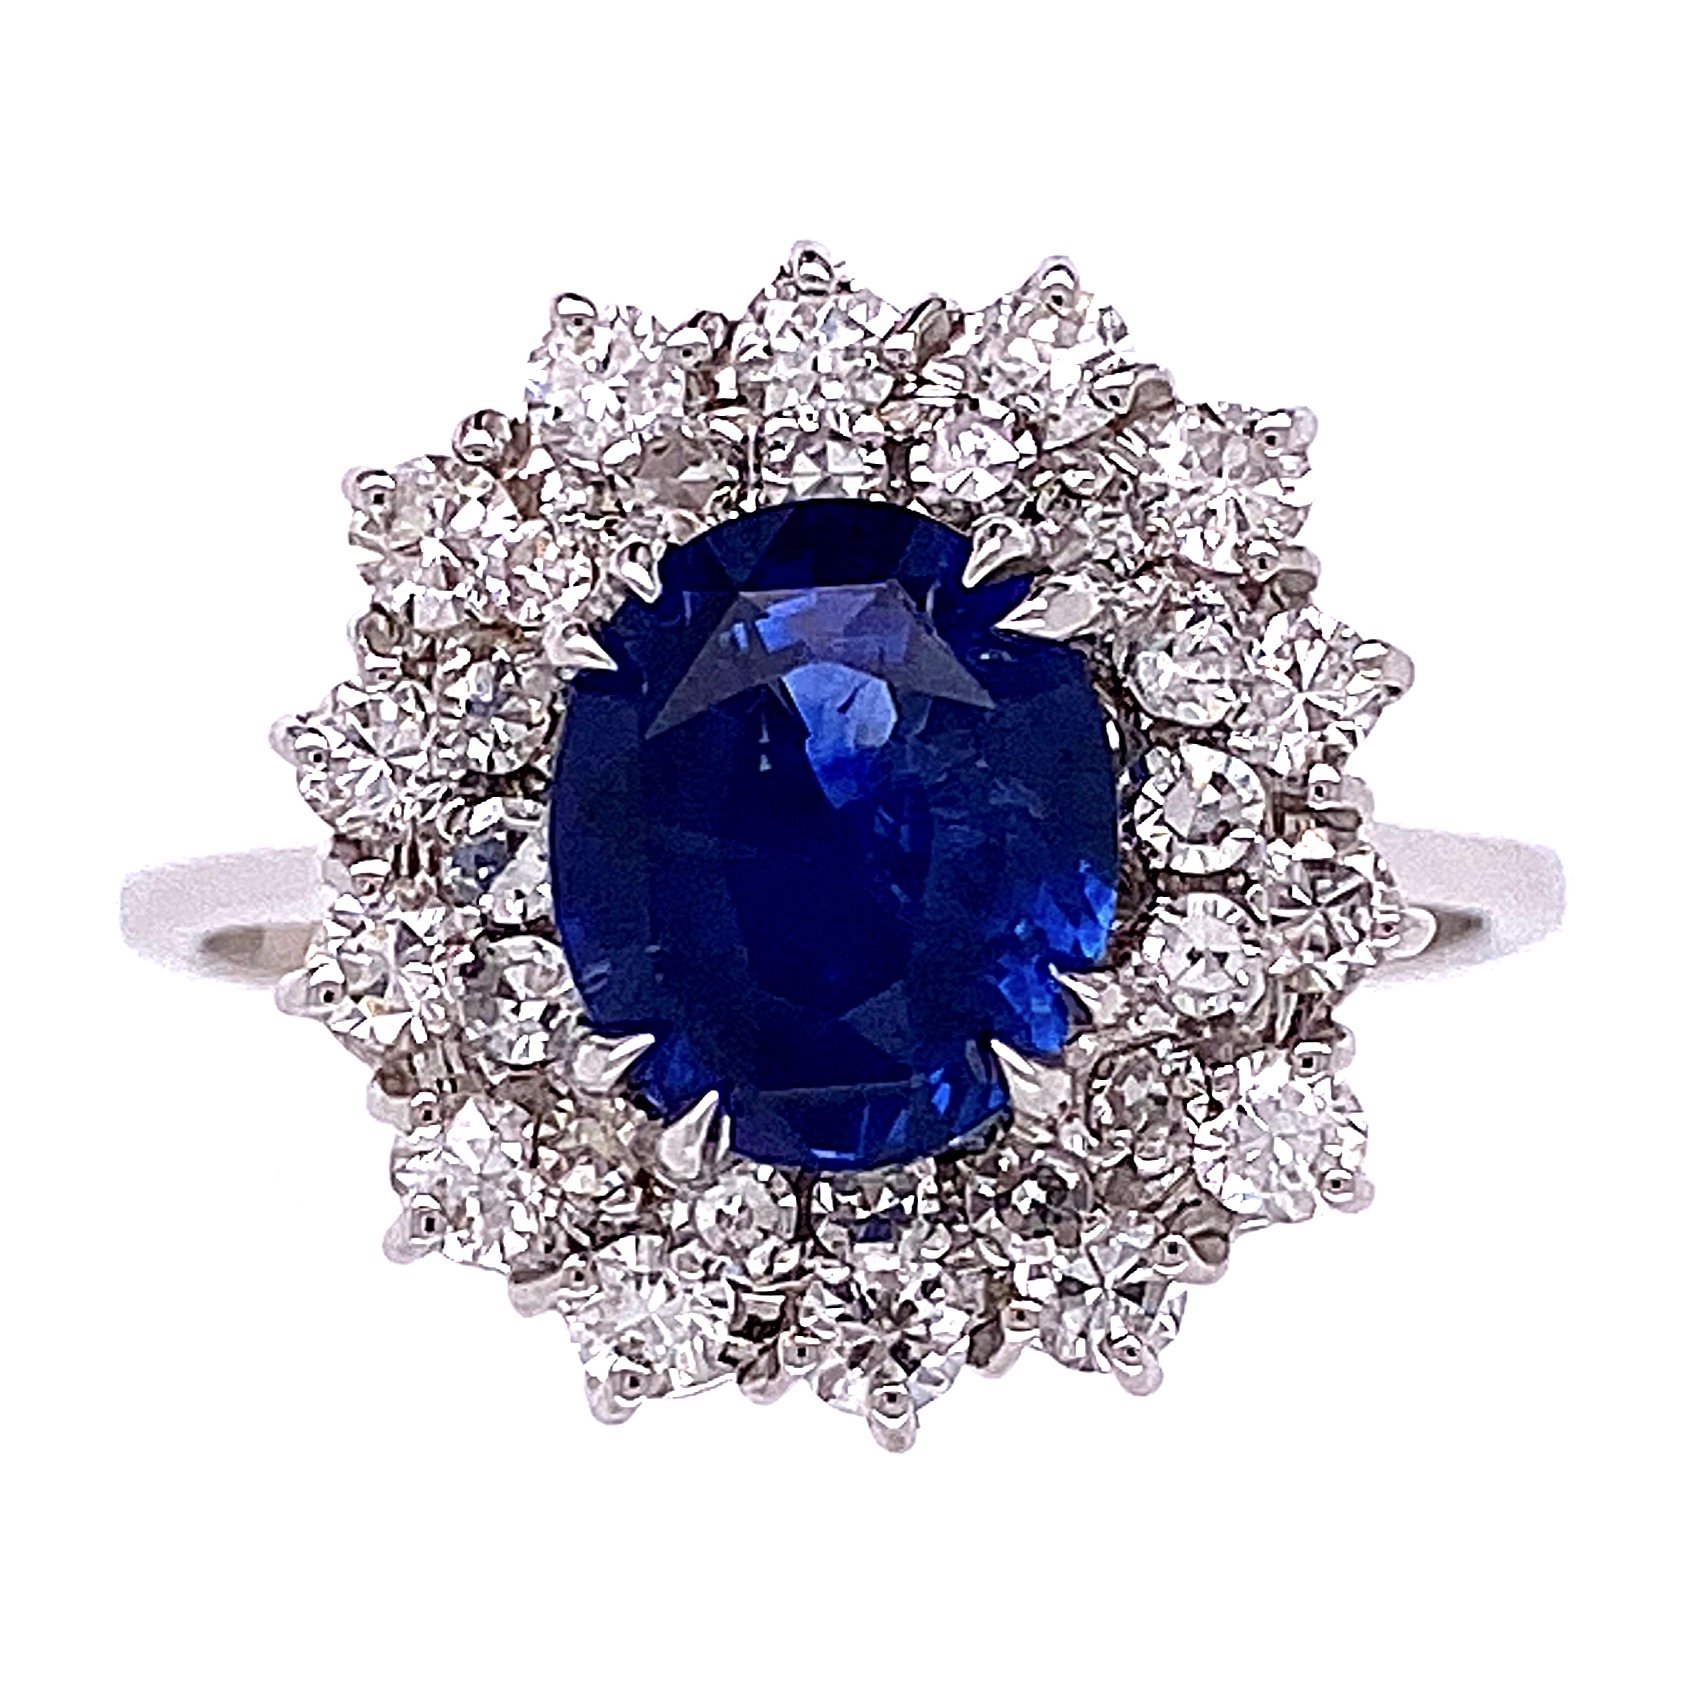 14K White Gold 2ct Natural Blue Sapphire Ring double halo diamonds 1.00tcw, 4.5g, s7